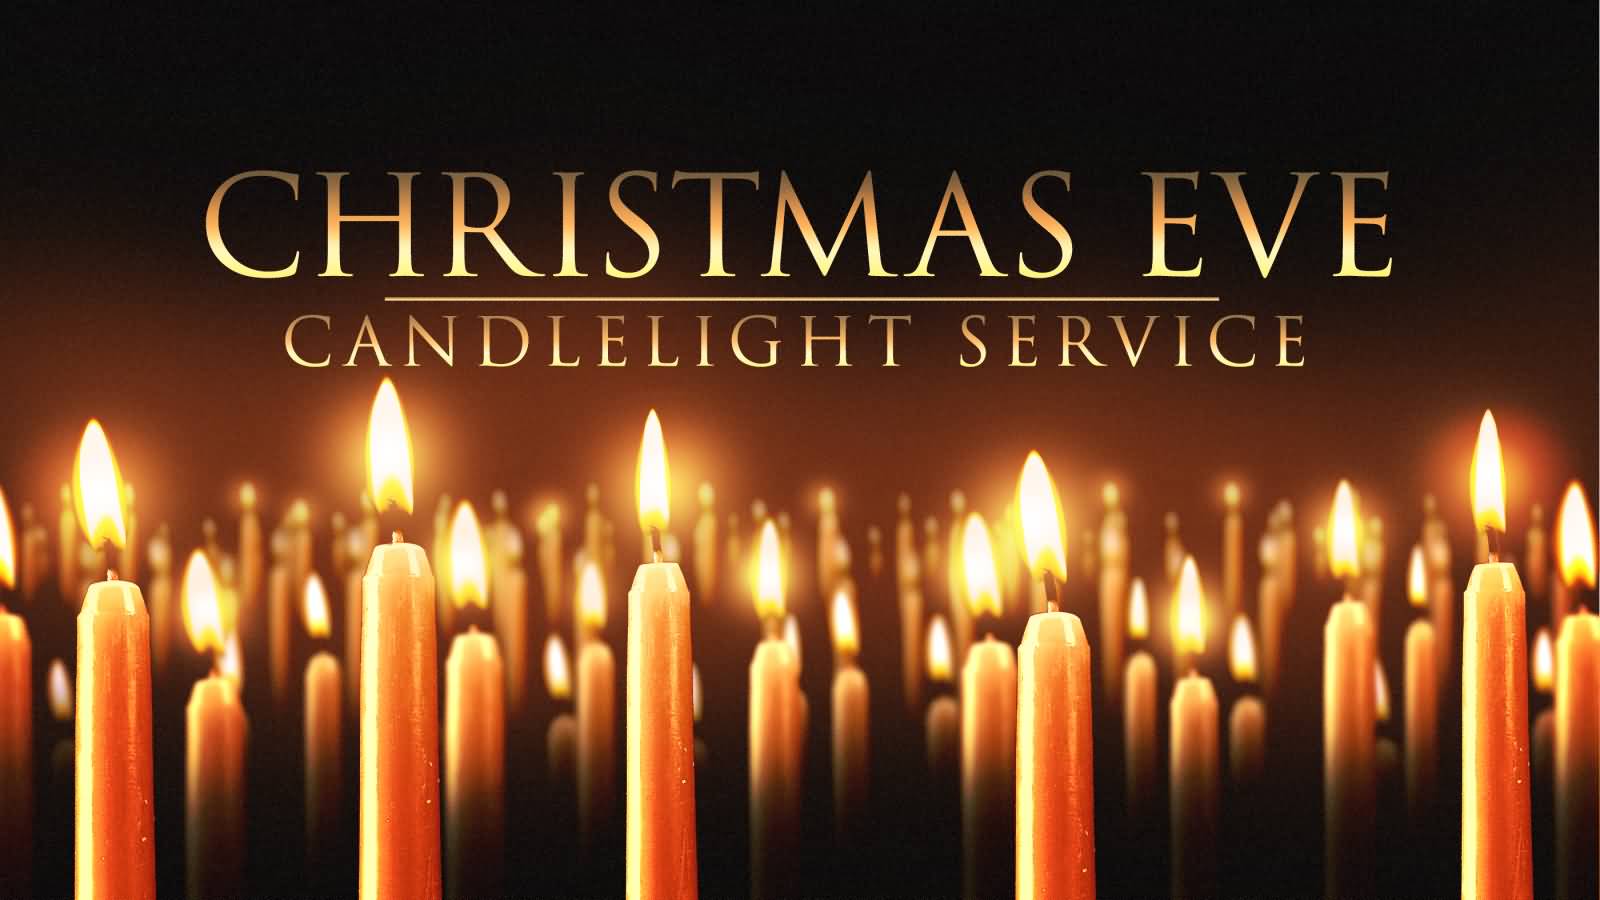 Christmas eve candlelight service clipart 3 Clipart Station